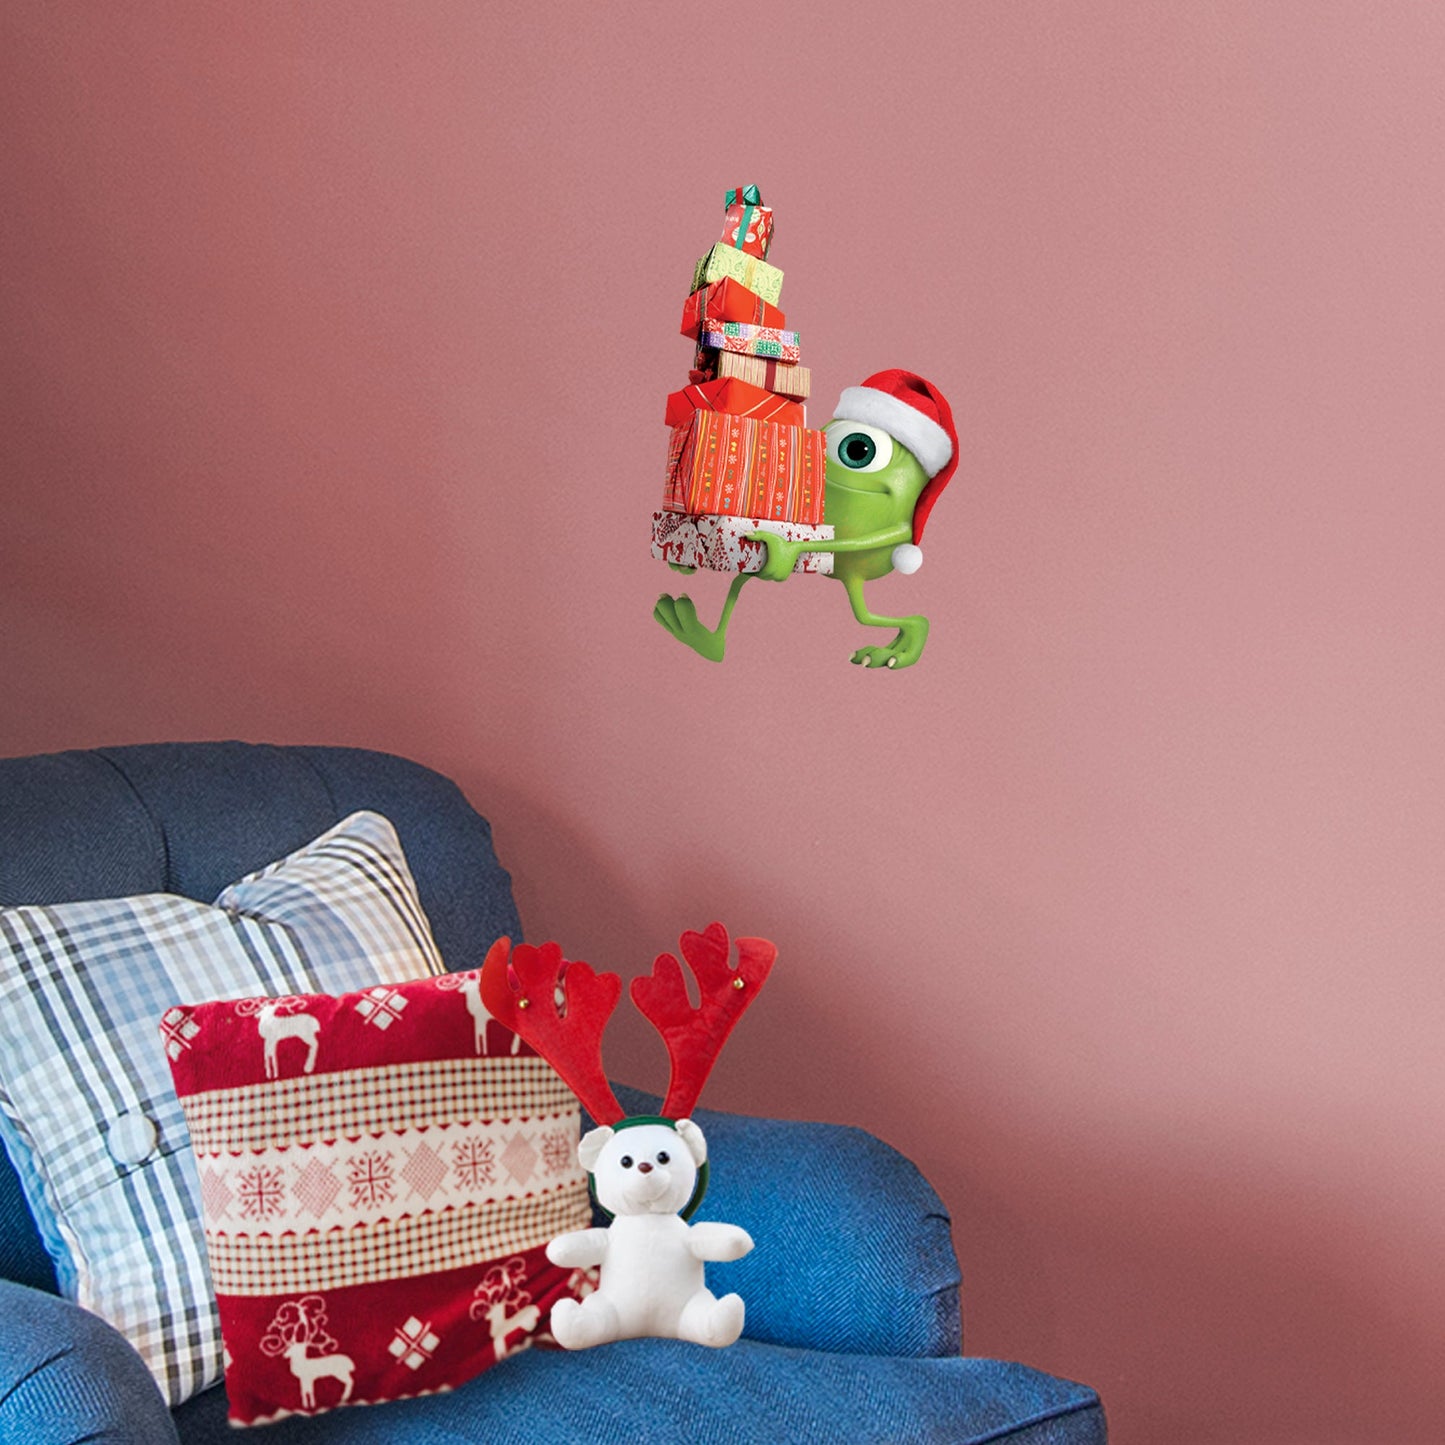 Pixar Holiday: Mike Wazowski Presents RealBig - Officially Licensed Disney Removable Adhesive Decal